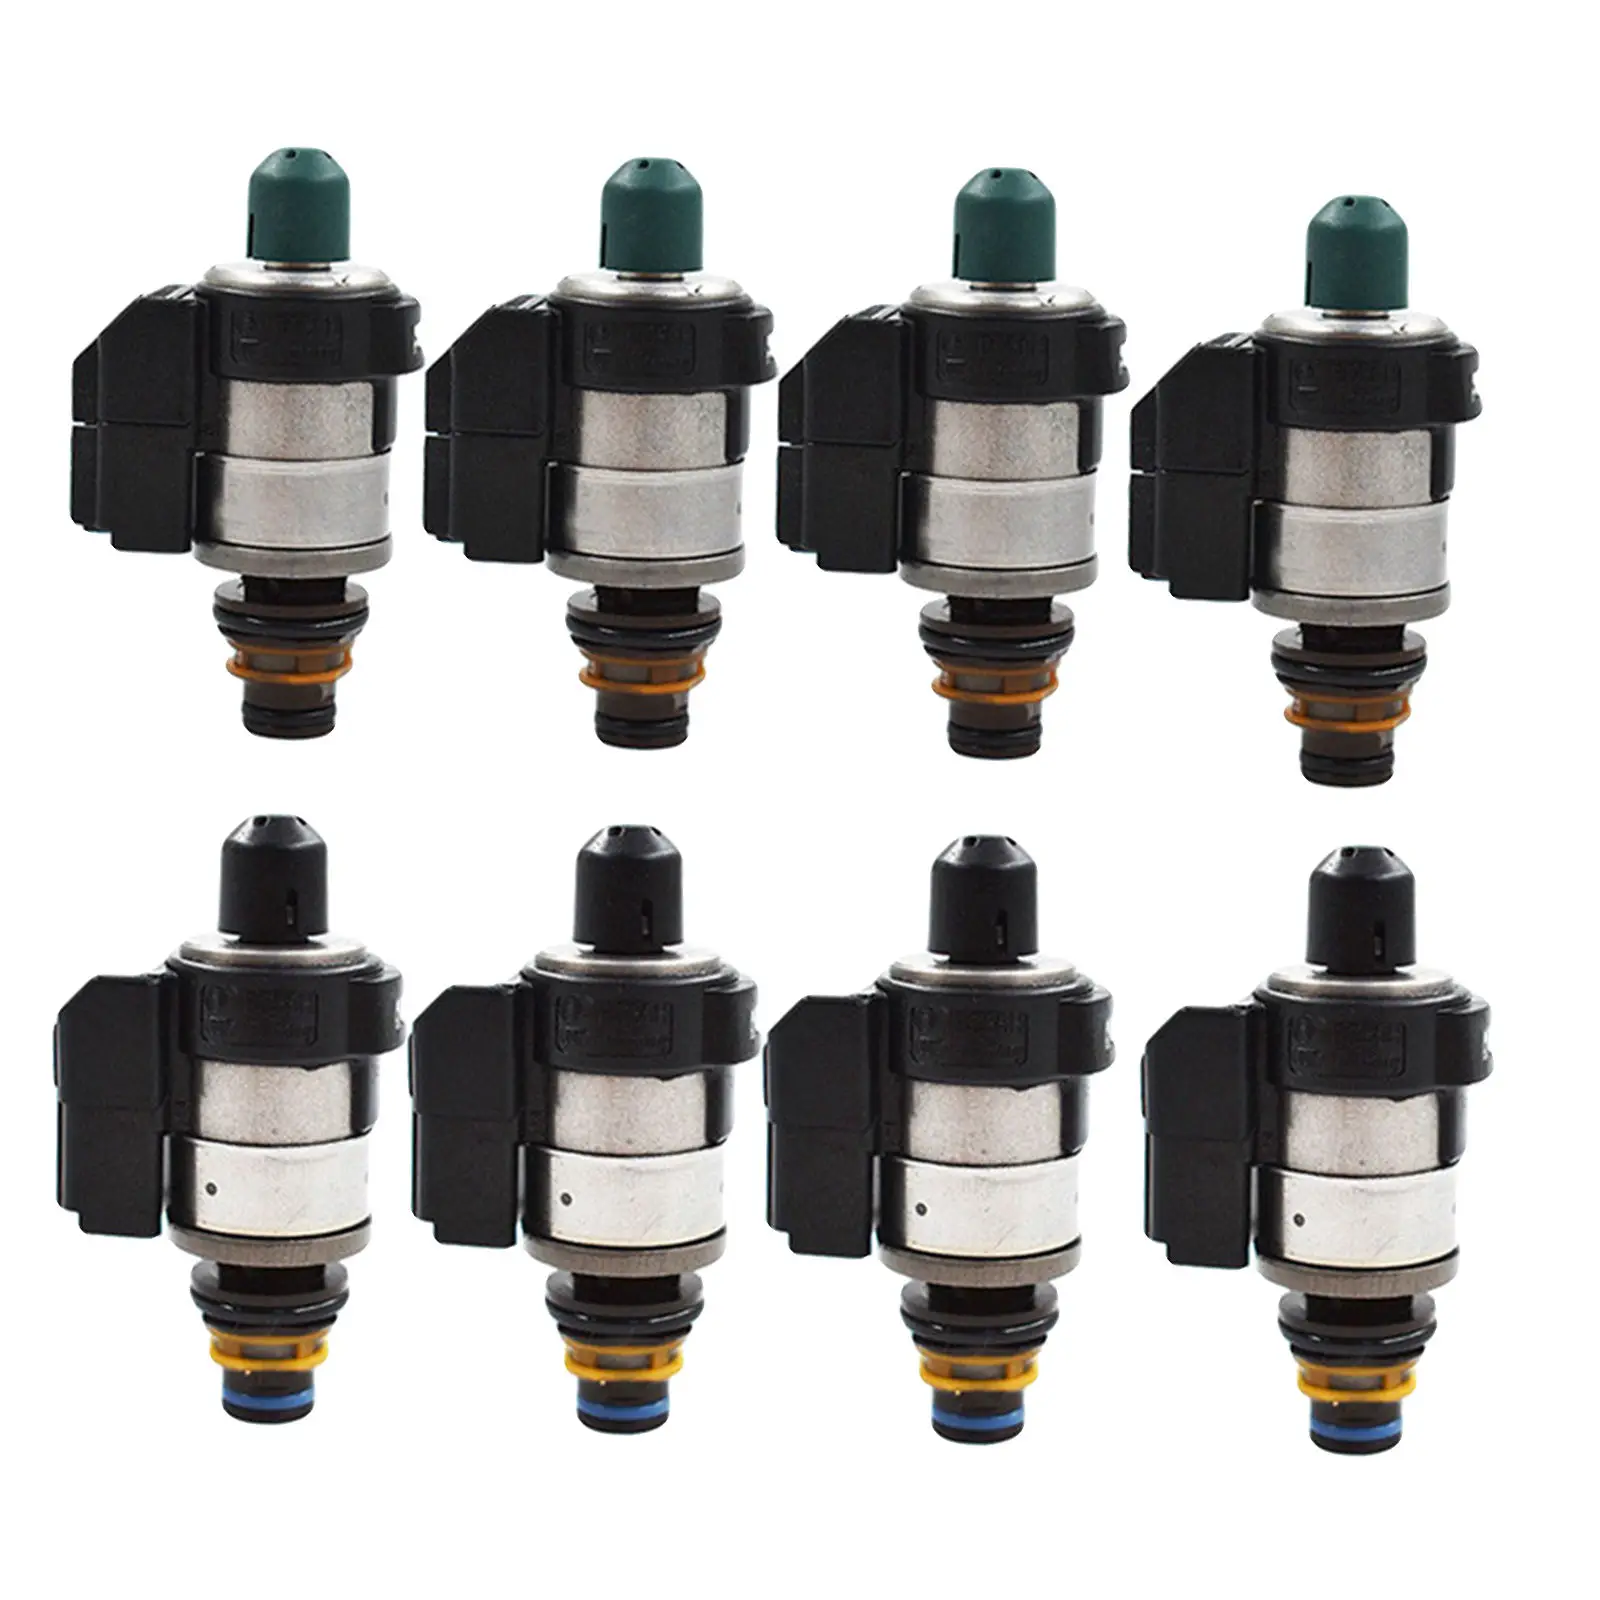 

8x Car Transmission Solenoids Kit For 7 Speed Automatic Transmission 722.9 0260130035 Accessories